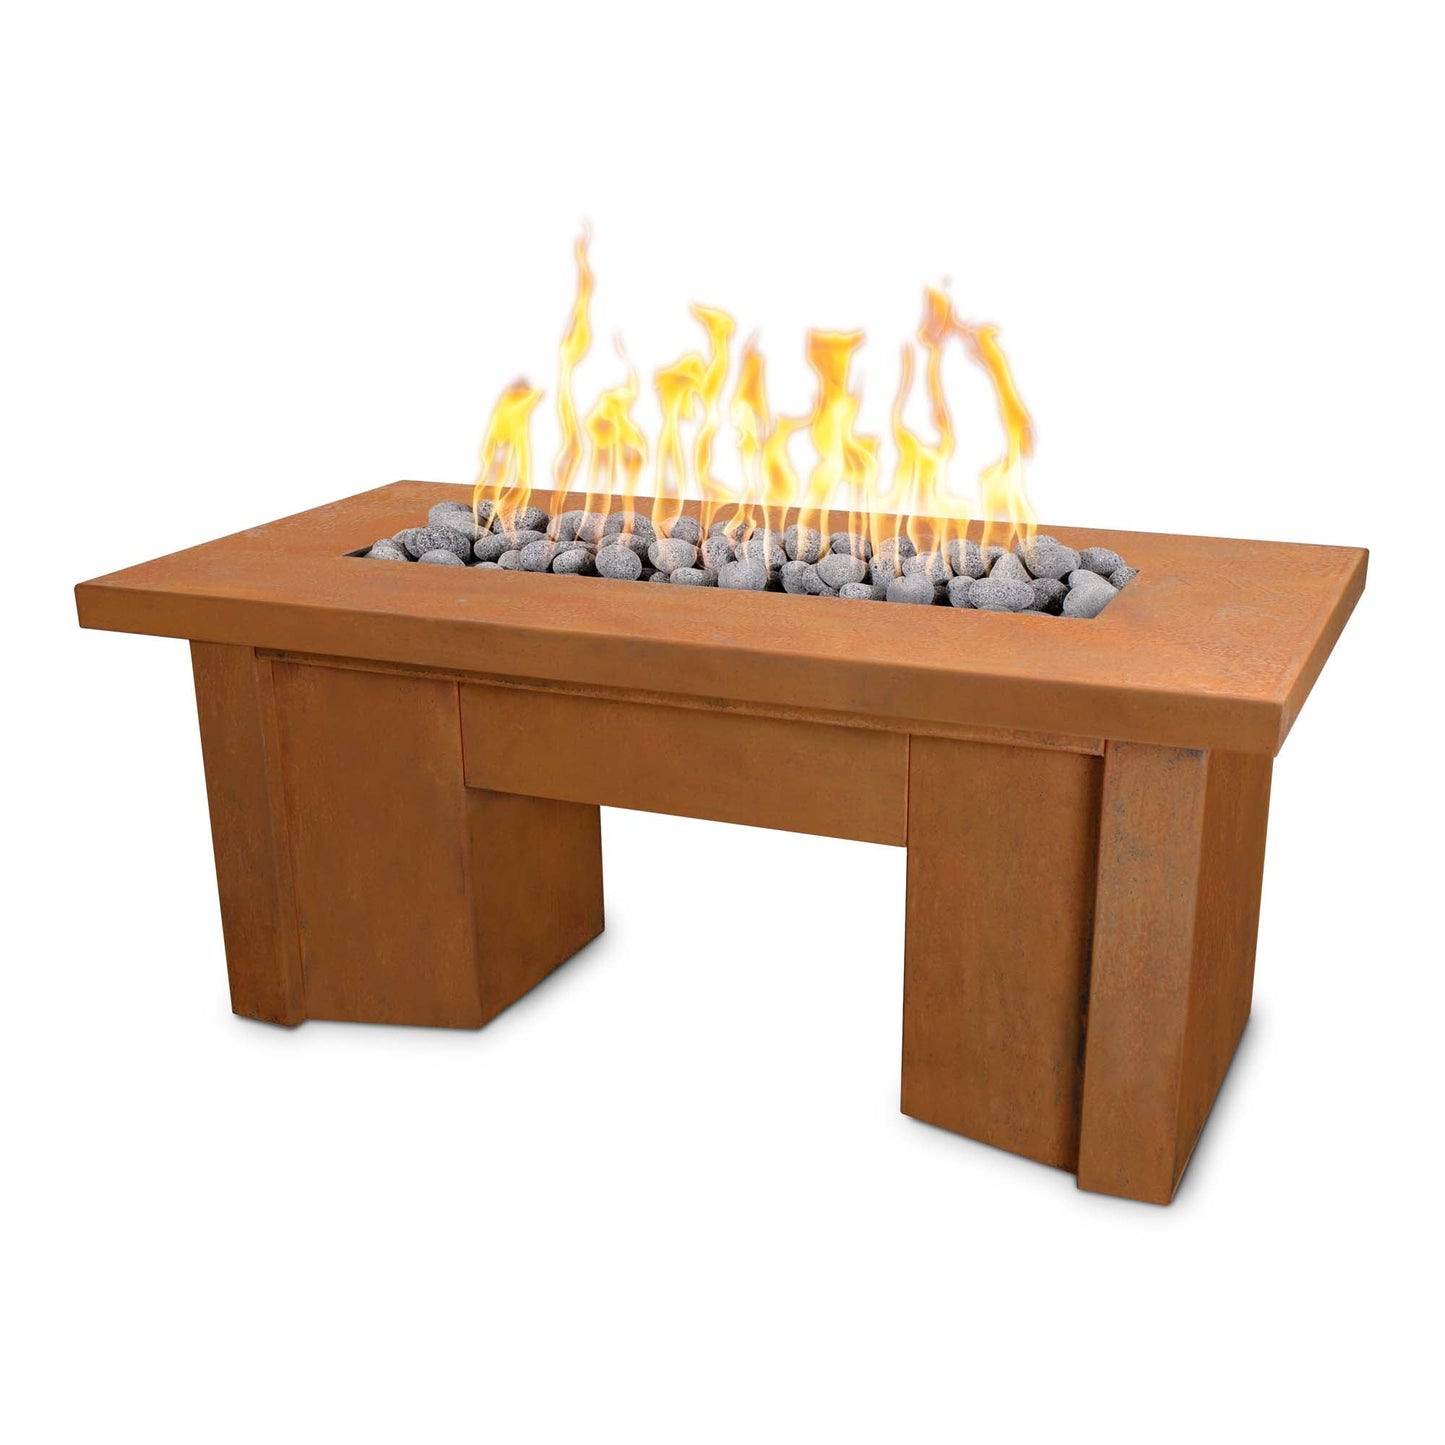 The Outdoor Plus Rectangular Alameda 78" Corten Steel Natural Gas Fire Pit with 12V Electronic Ignition